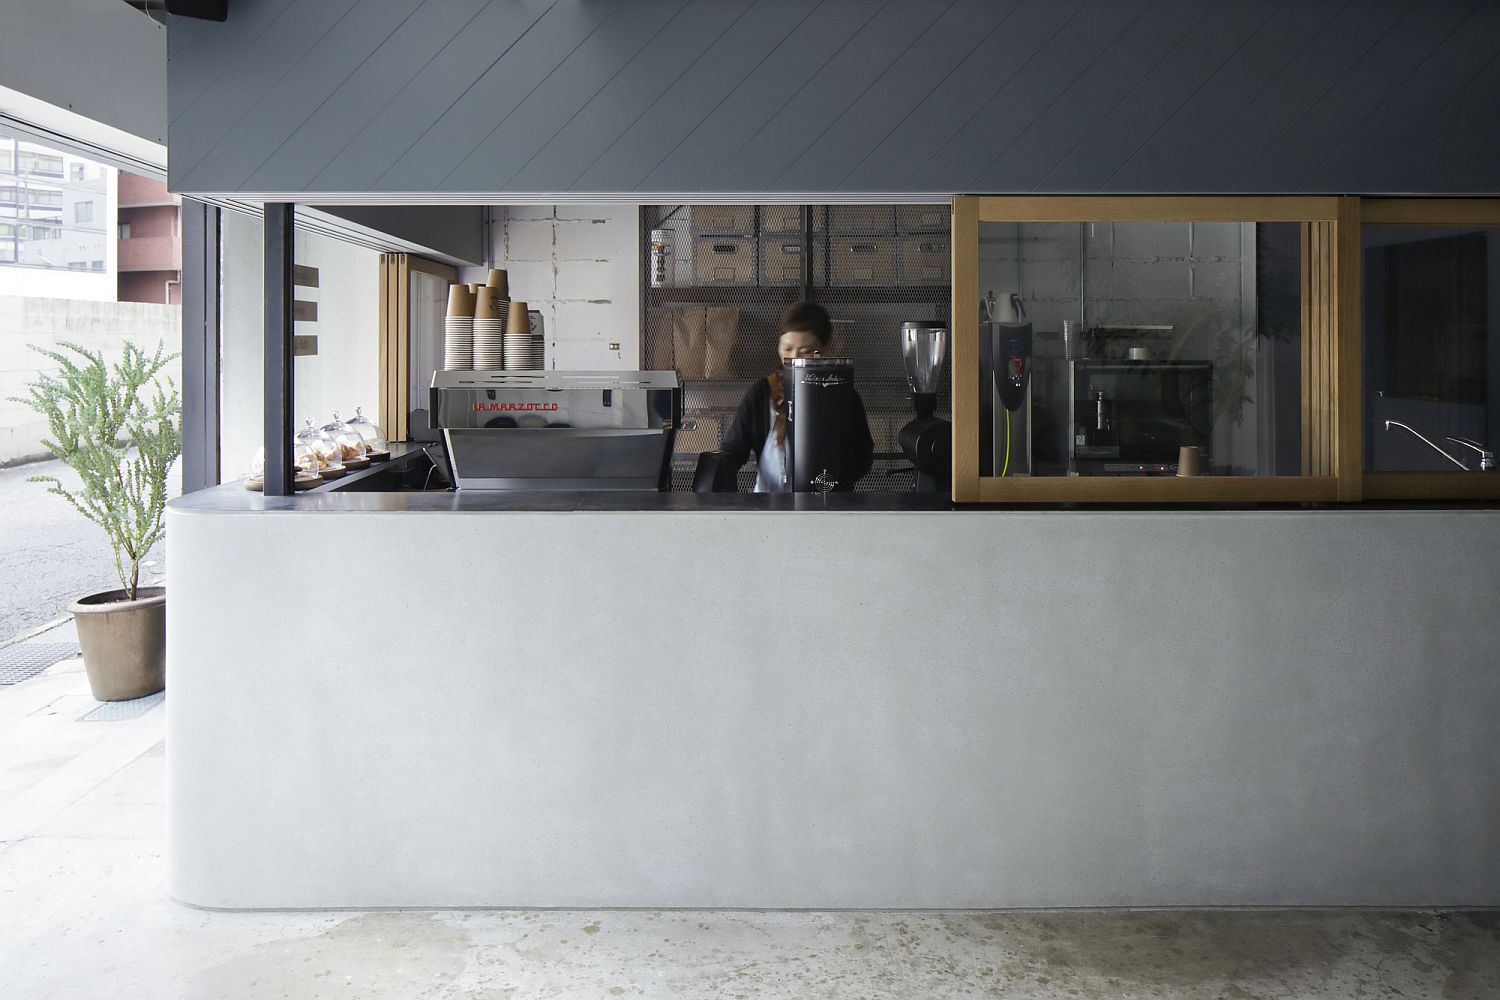 Simple-and-unassuming-design-of-the-coffee-shop-with-white-and-blue-interior